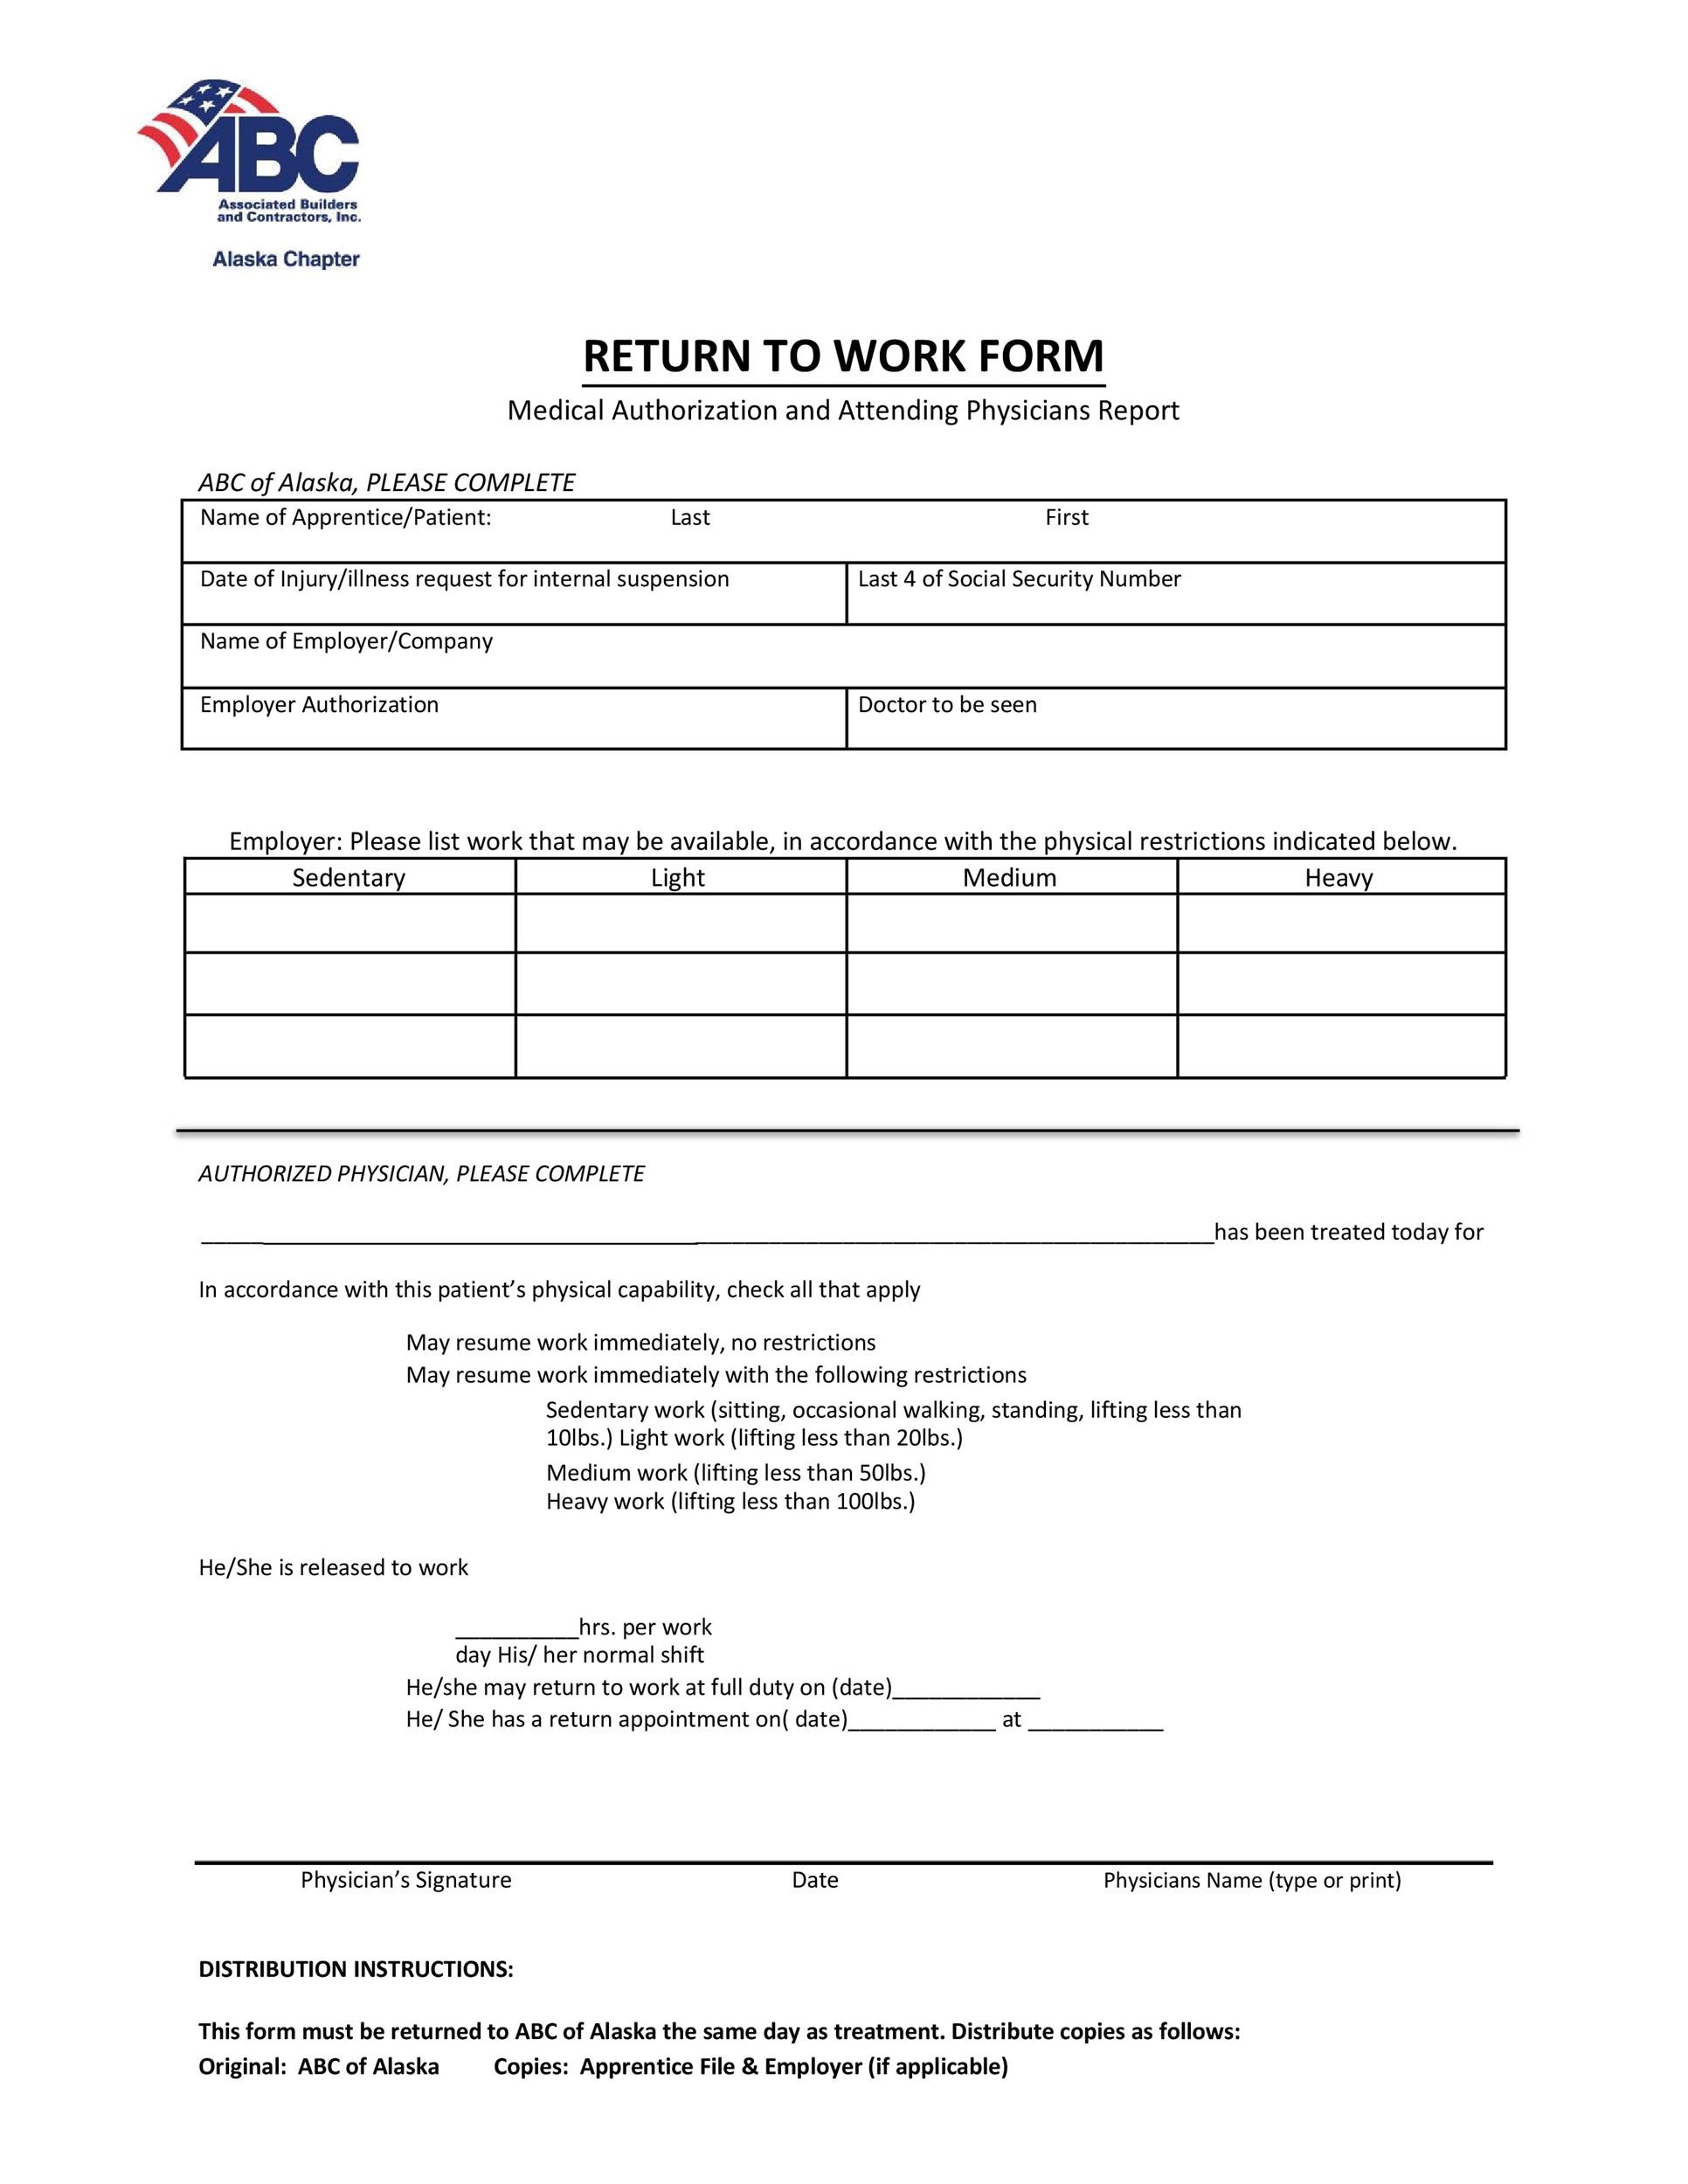 Return To Work Letter From Doctor To Employer | c-punkt